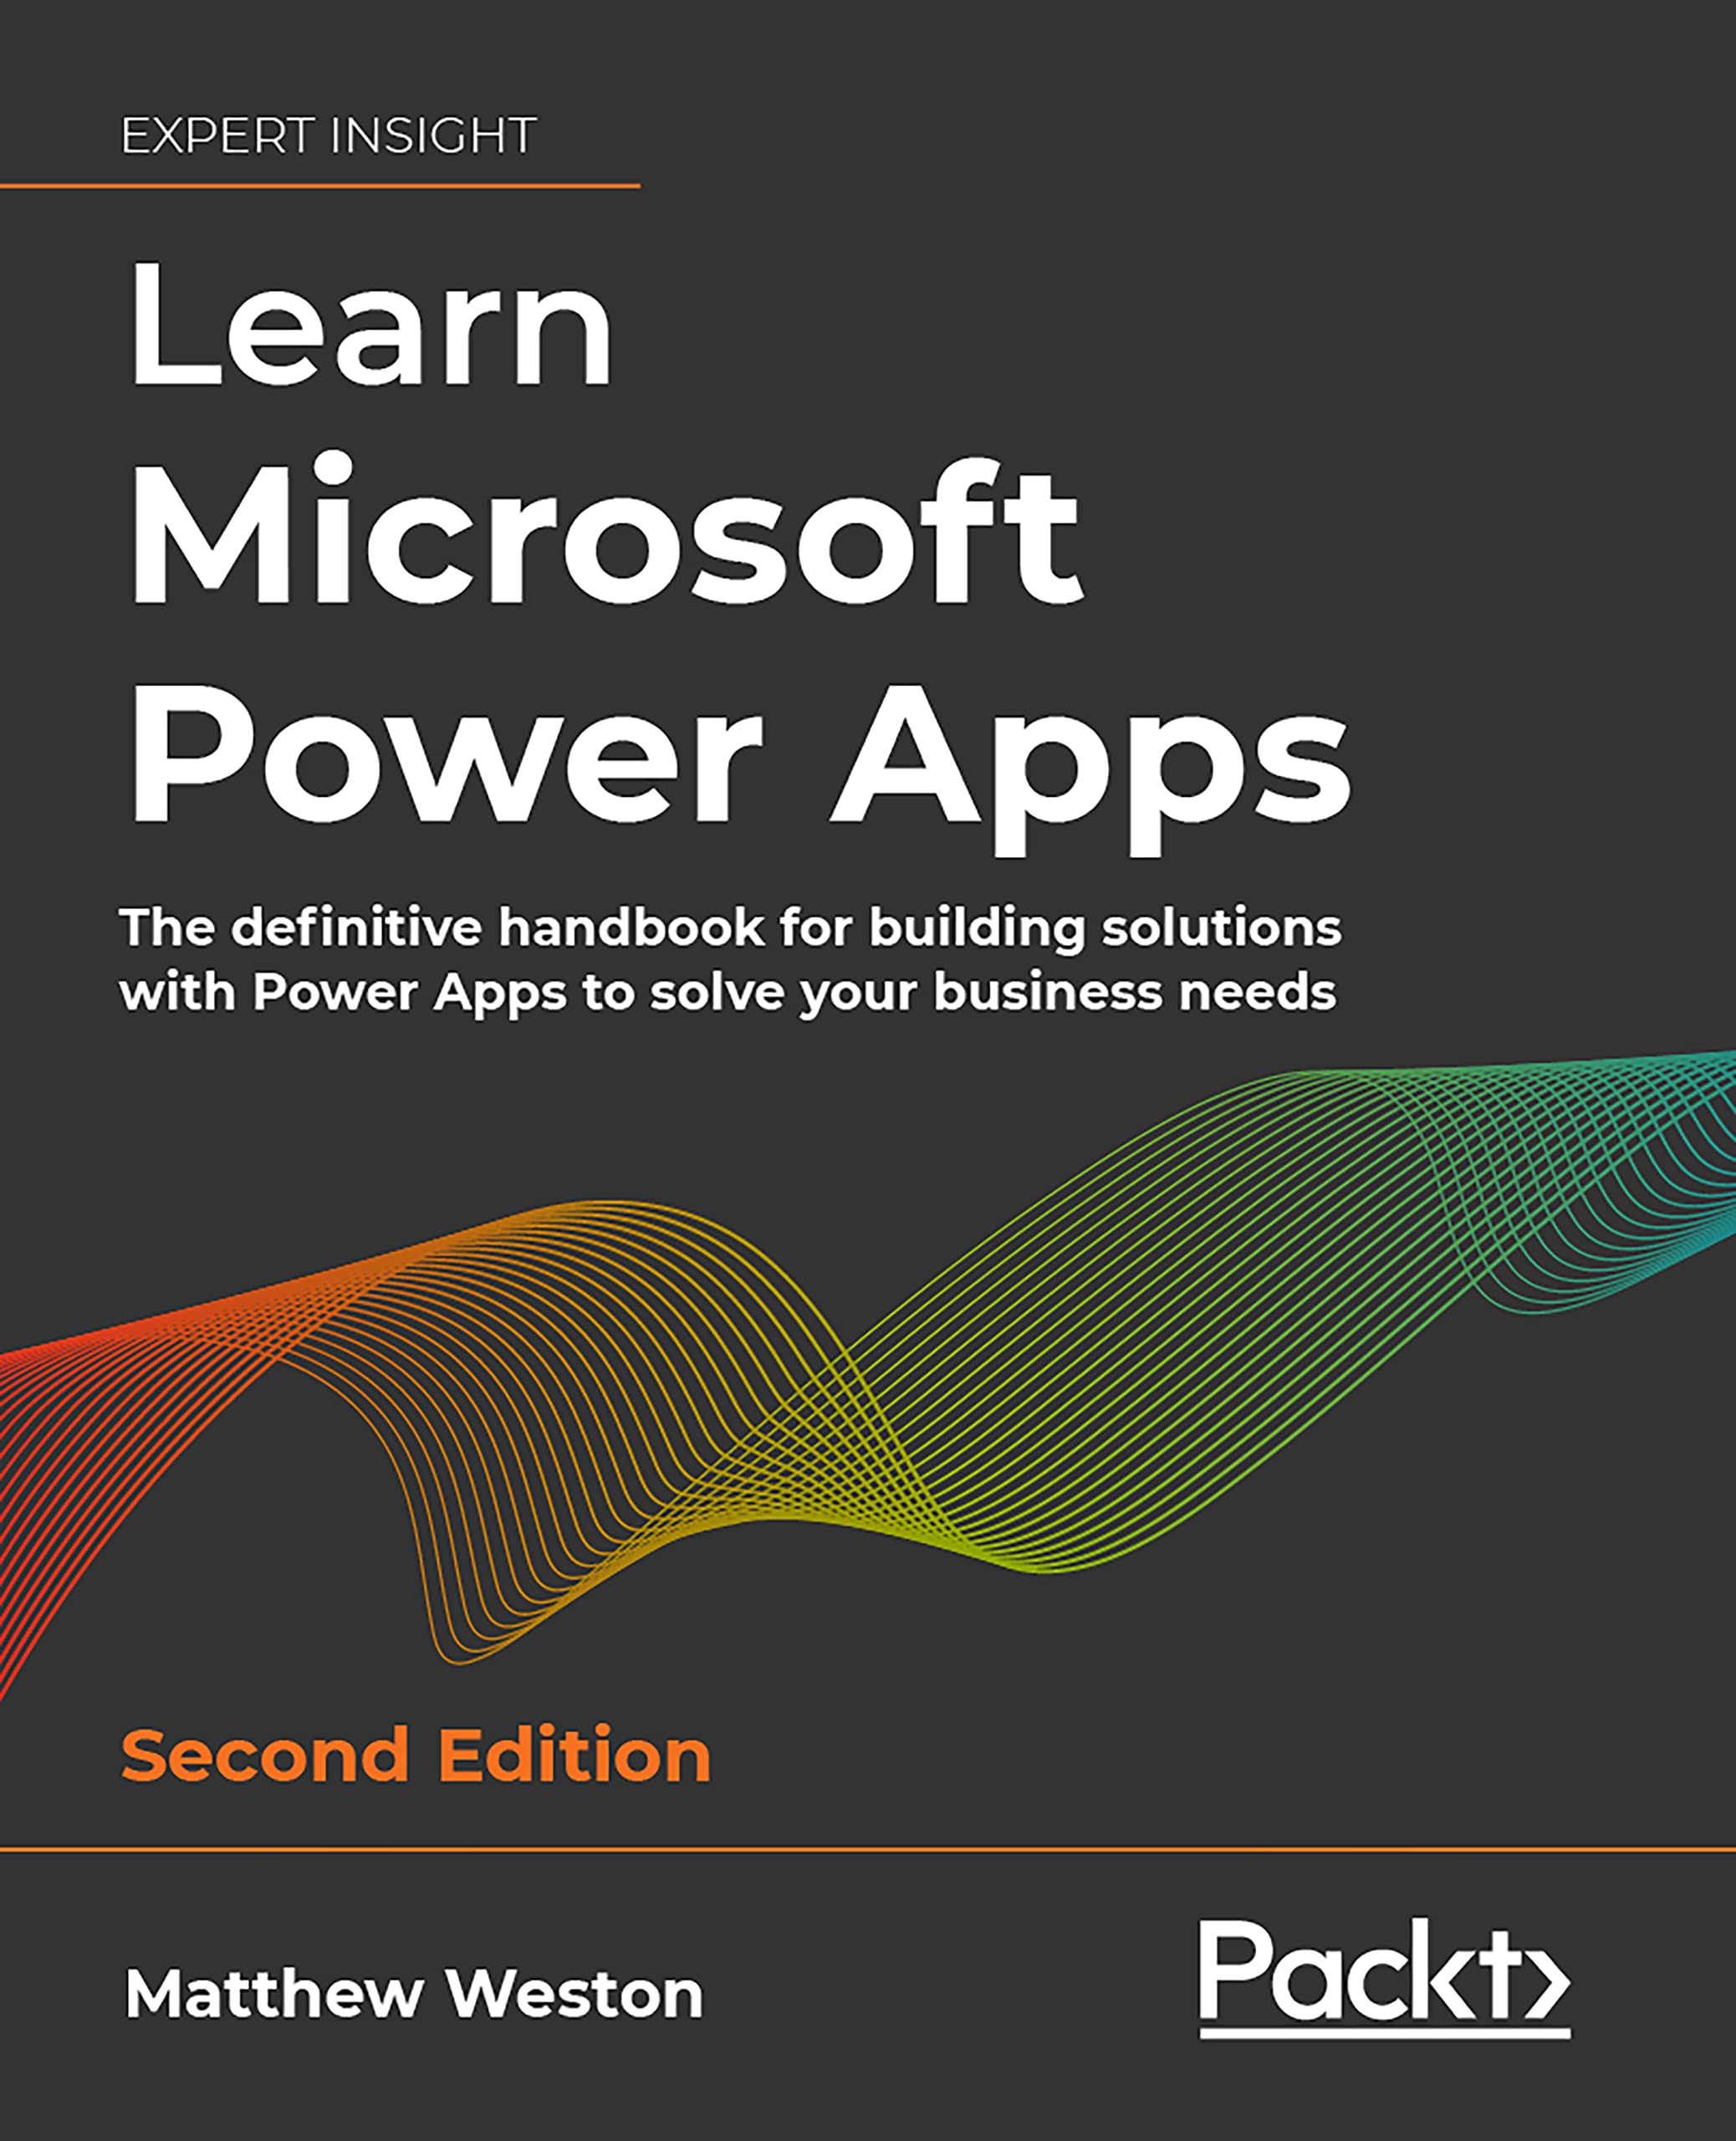 Learn Microsoft Power Apps: The definitive handbook for building solutions with Power Apps to solve your business needs, 2nd Edition